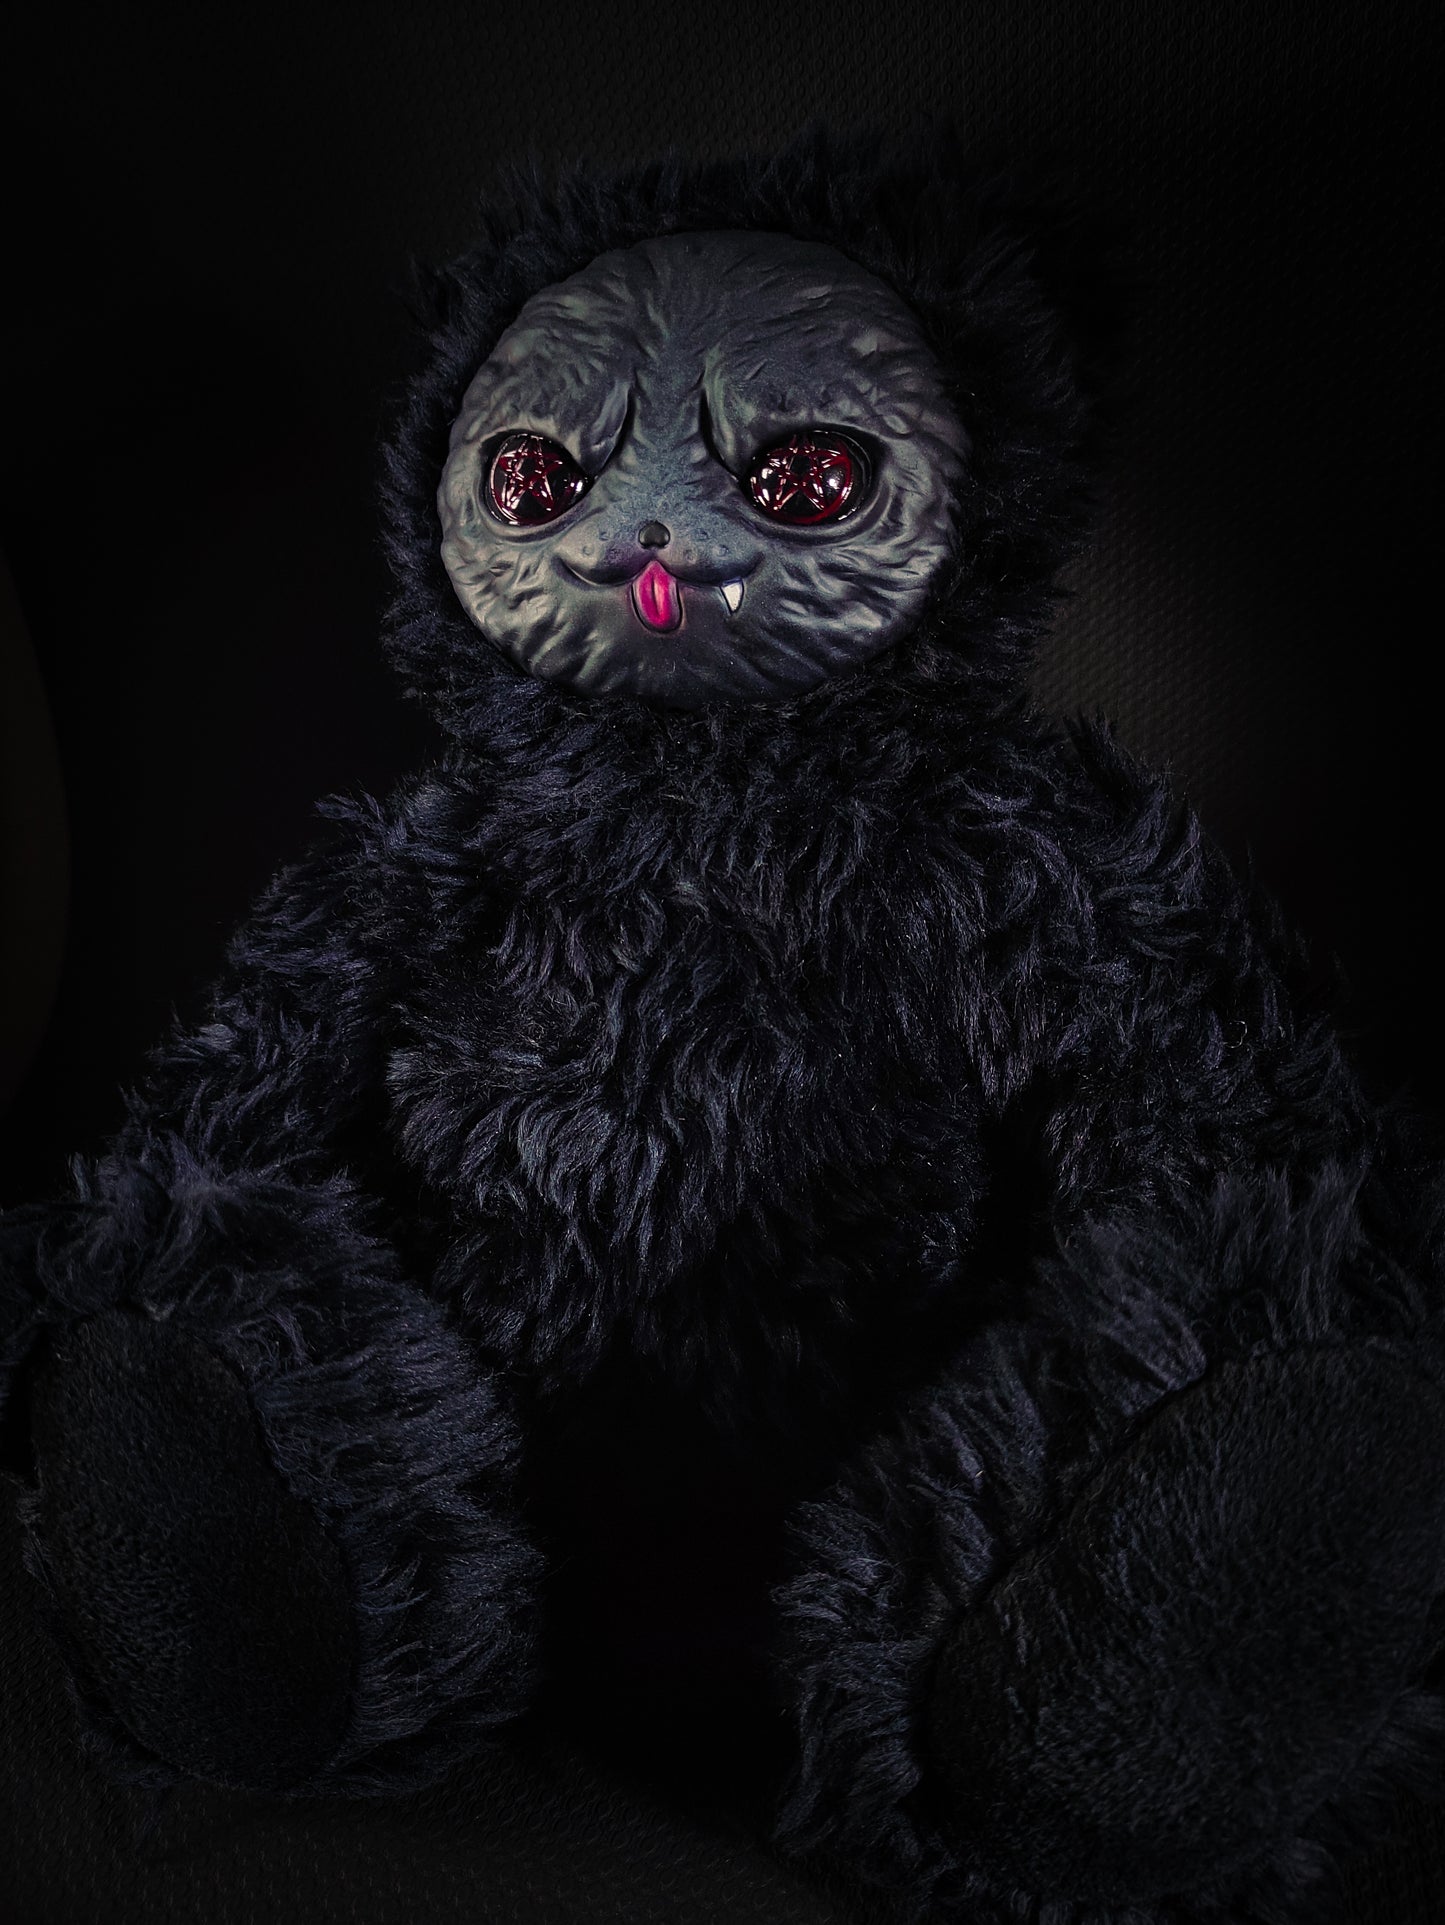 Purroz (Cursed Critter Ver.) - Monster Art Doll Plush Toy